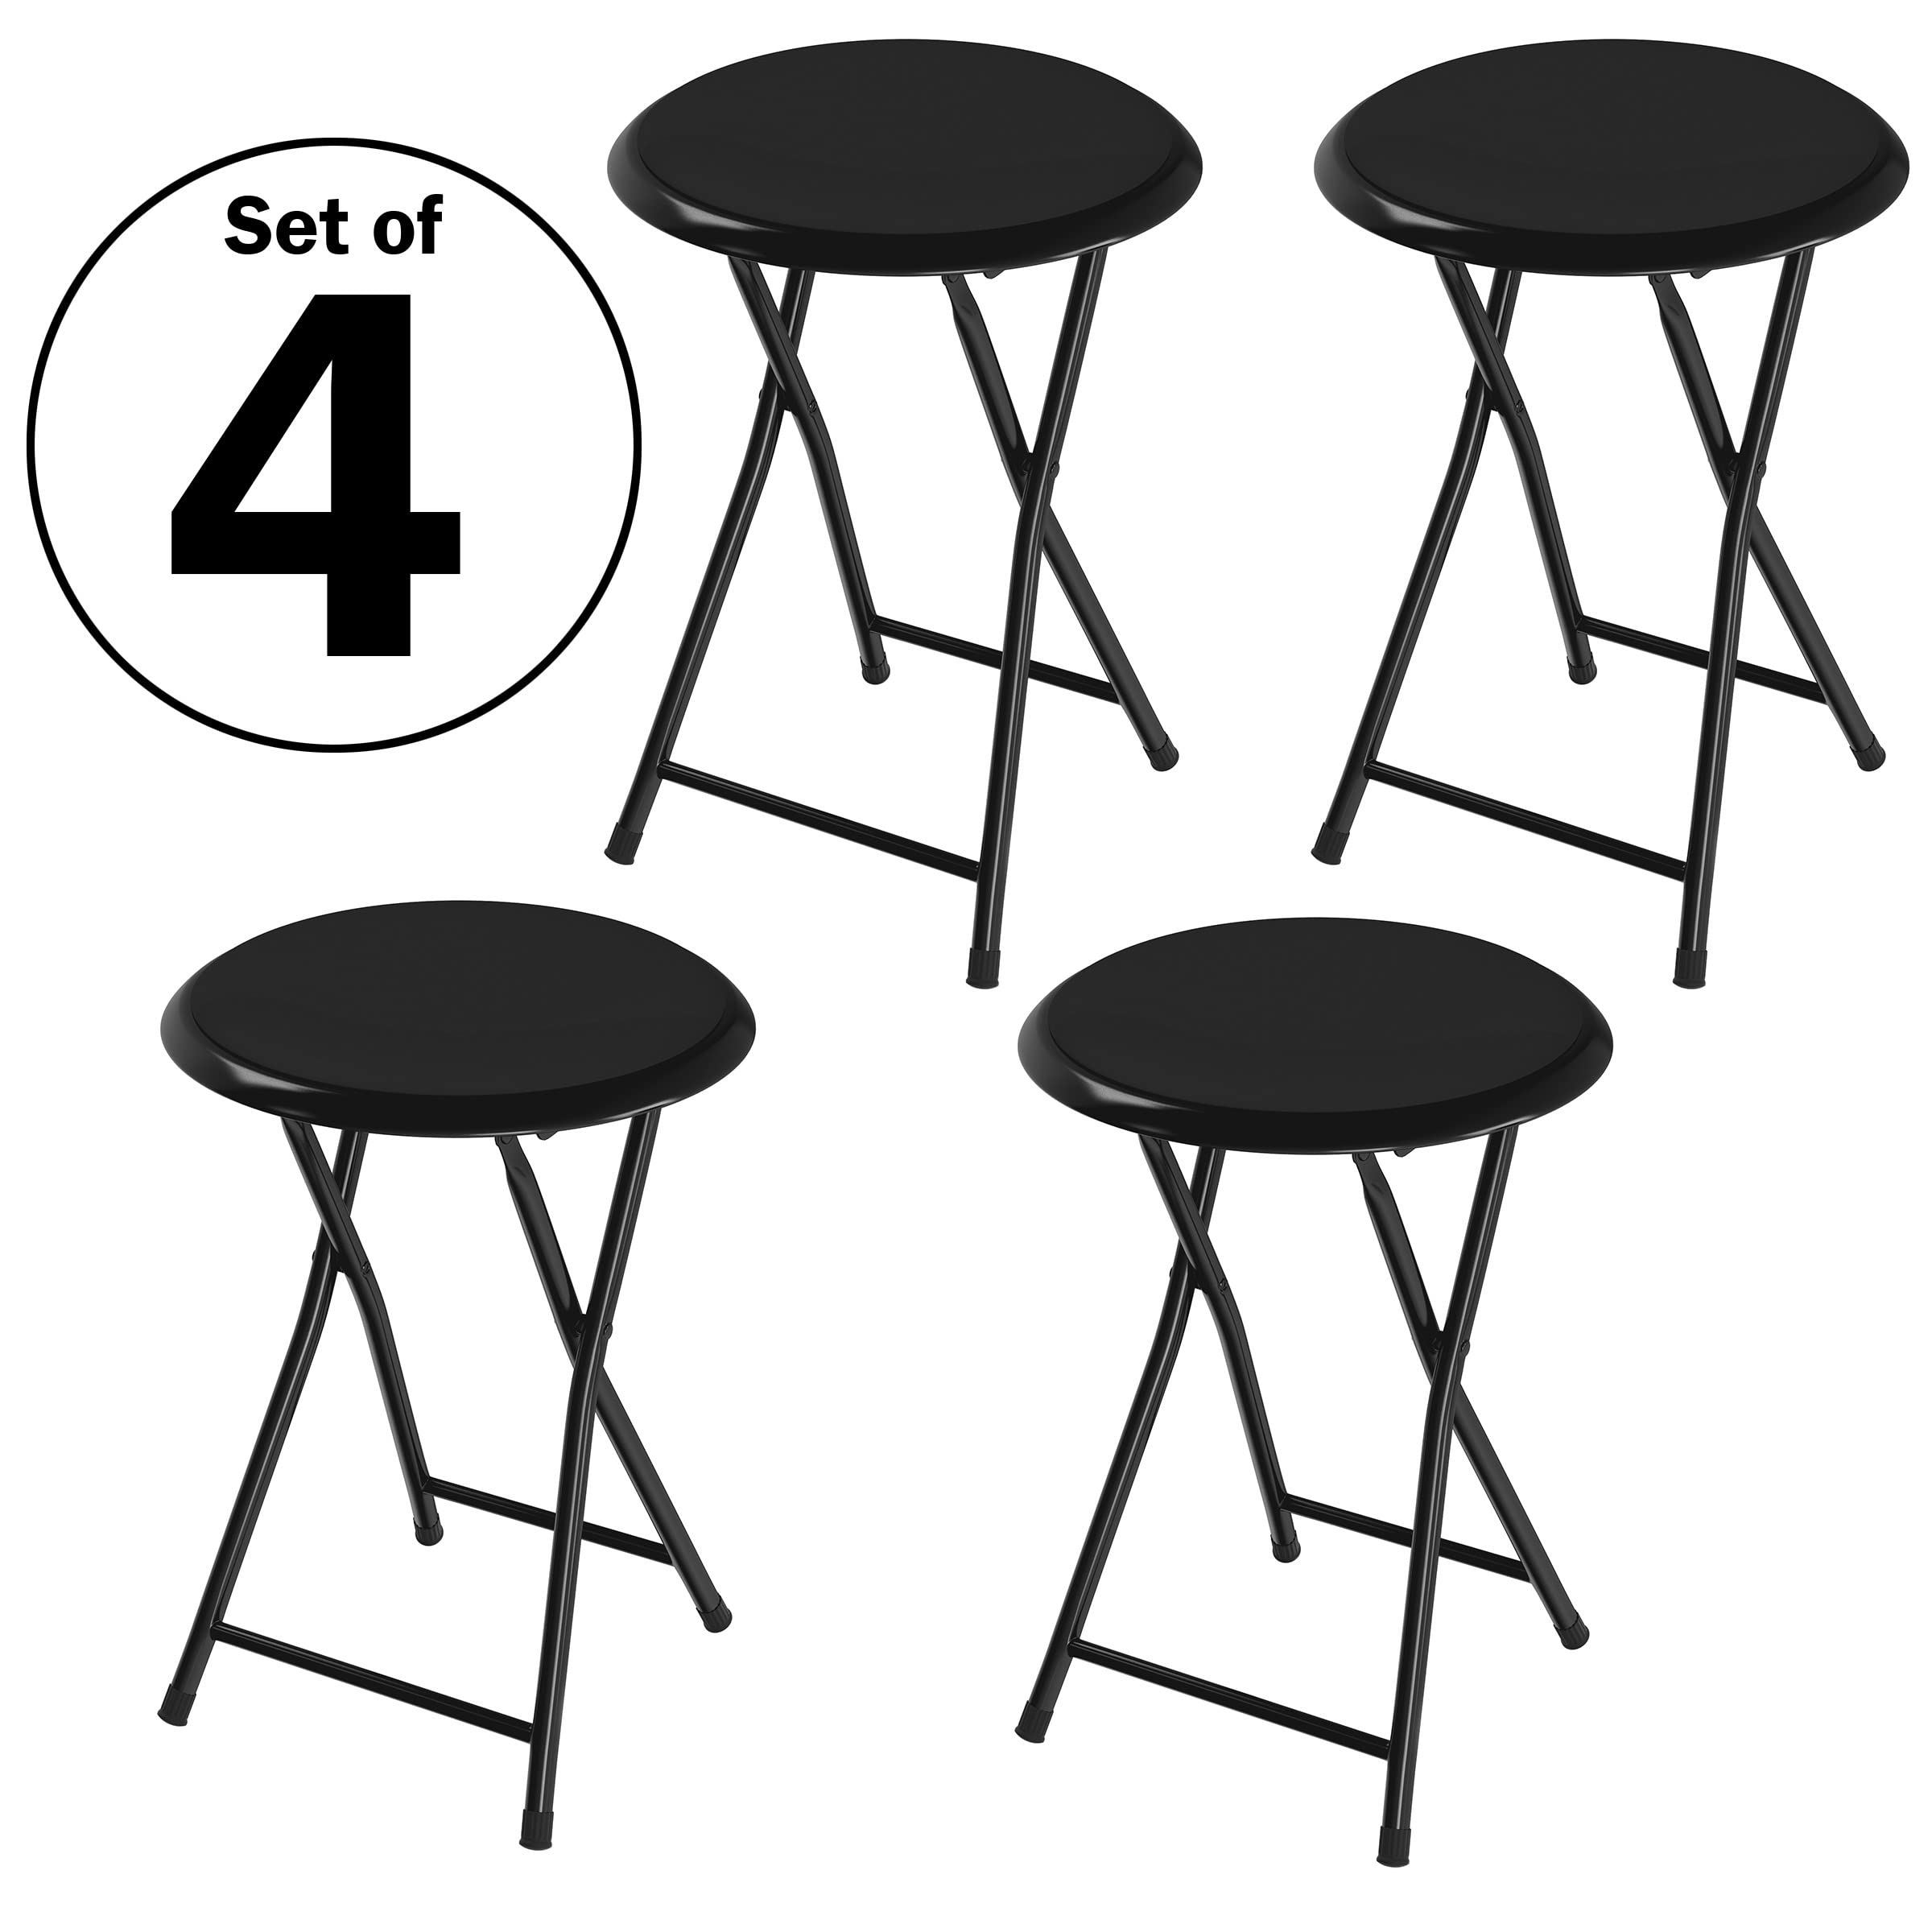 Folding Bar Stools - Set of 4 Heavy-Duty 18-Inch Stool - 225lb Capacity and Padded Seats for Dorm, Recreation or Game Room by Trademark Home (Black)-$49.39 Free shipping on Amazon